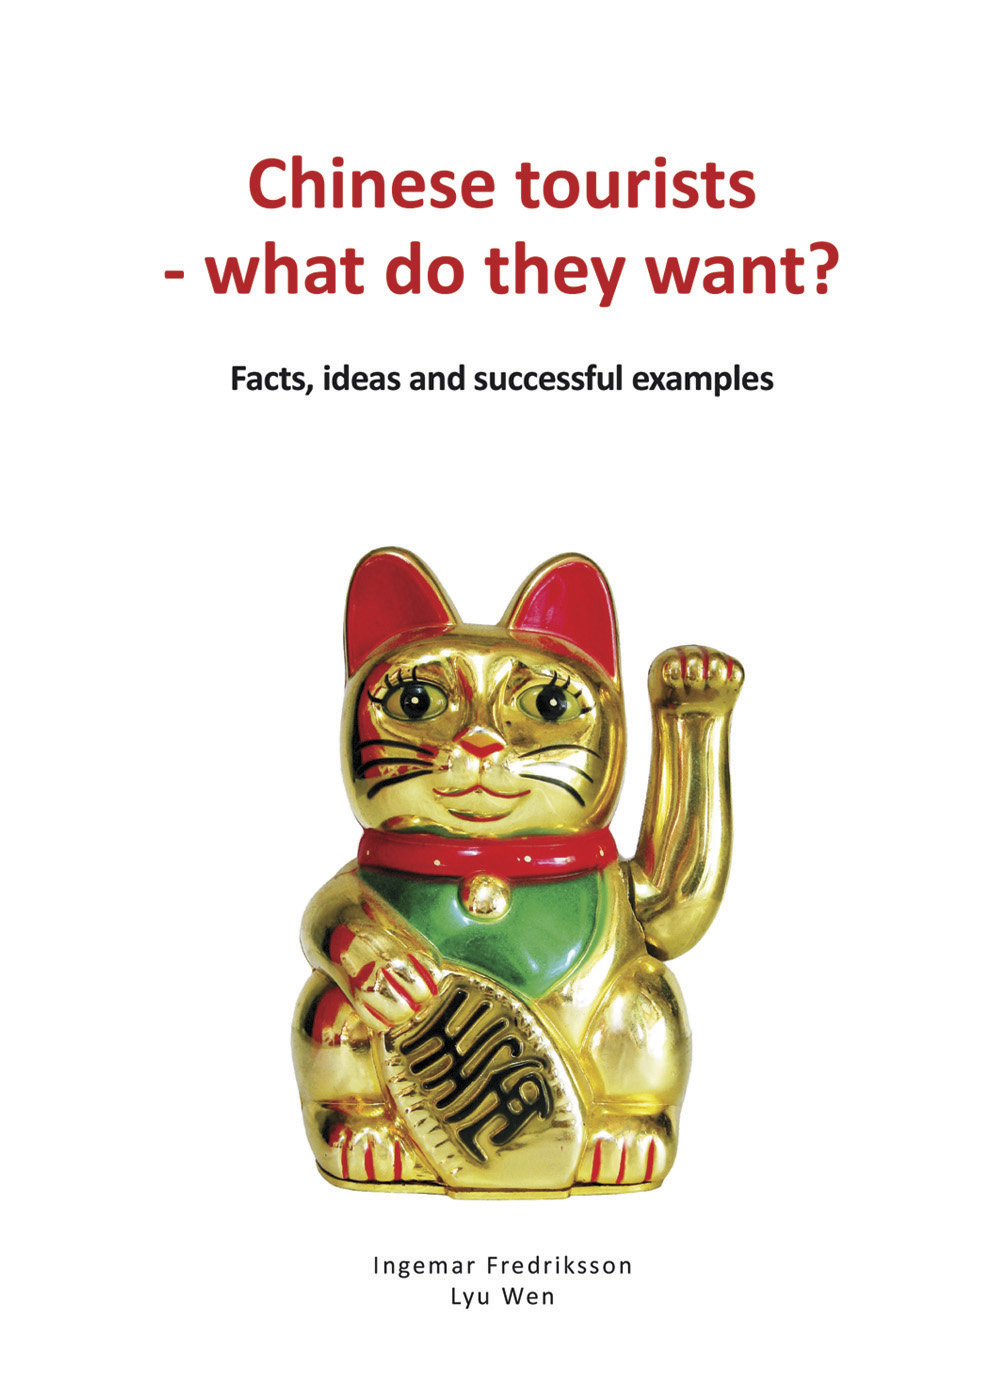 Cover of the book Chinese tourists - what do they want Facts, ideas and successful examples by Ingemar Fredriksson